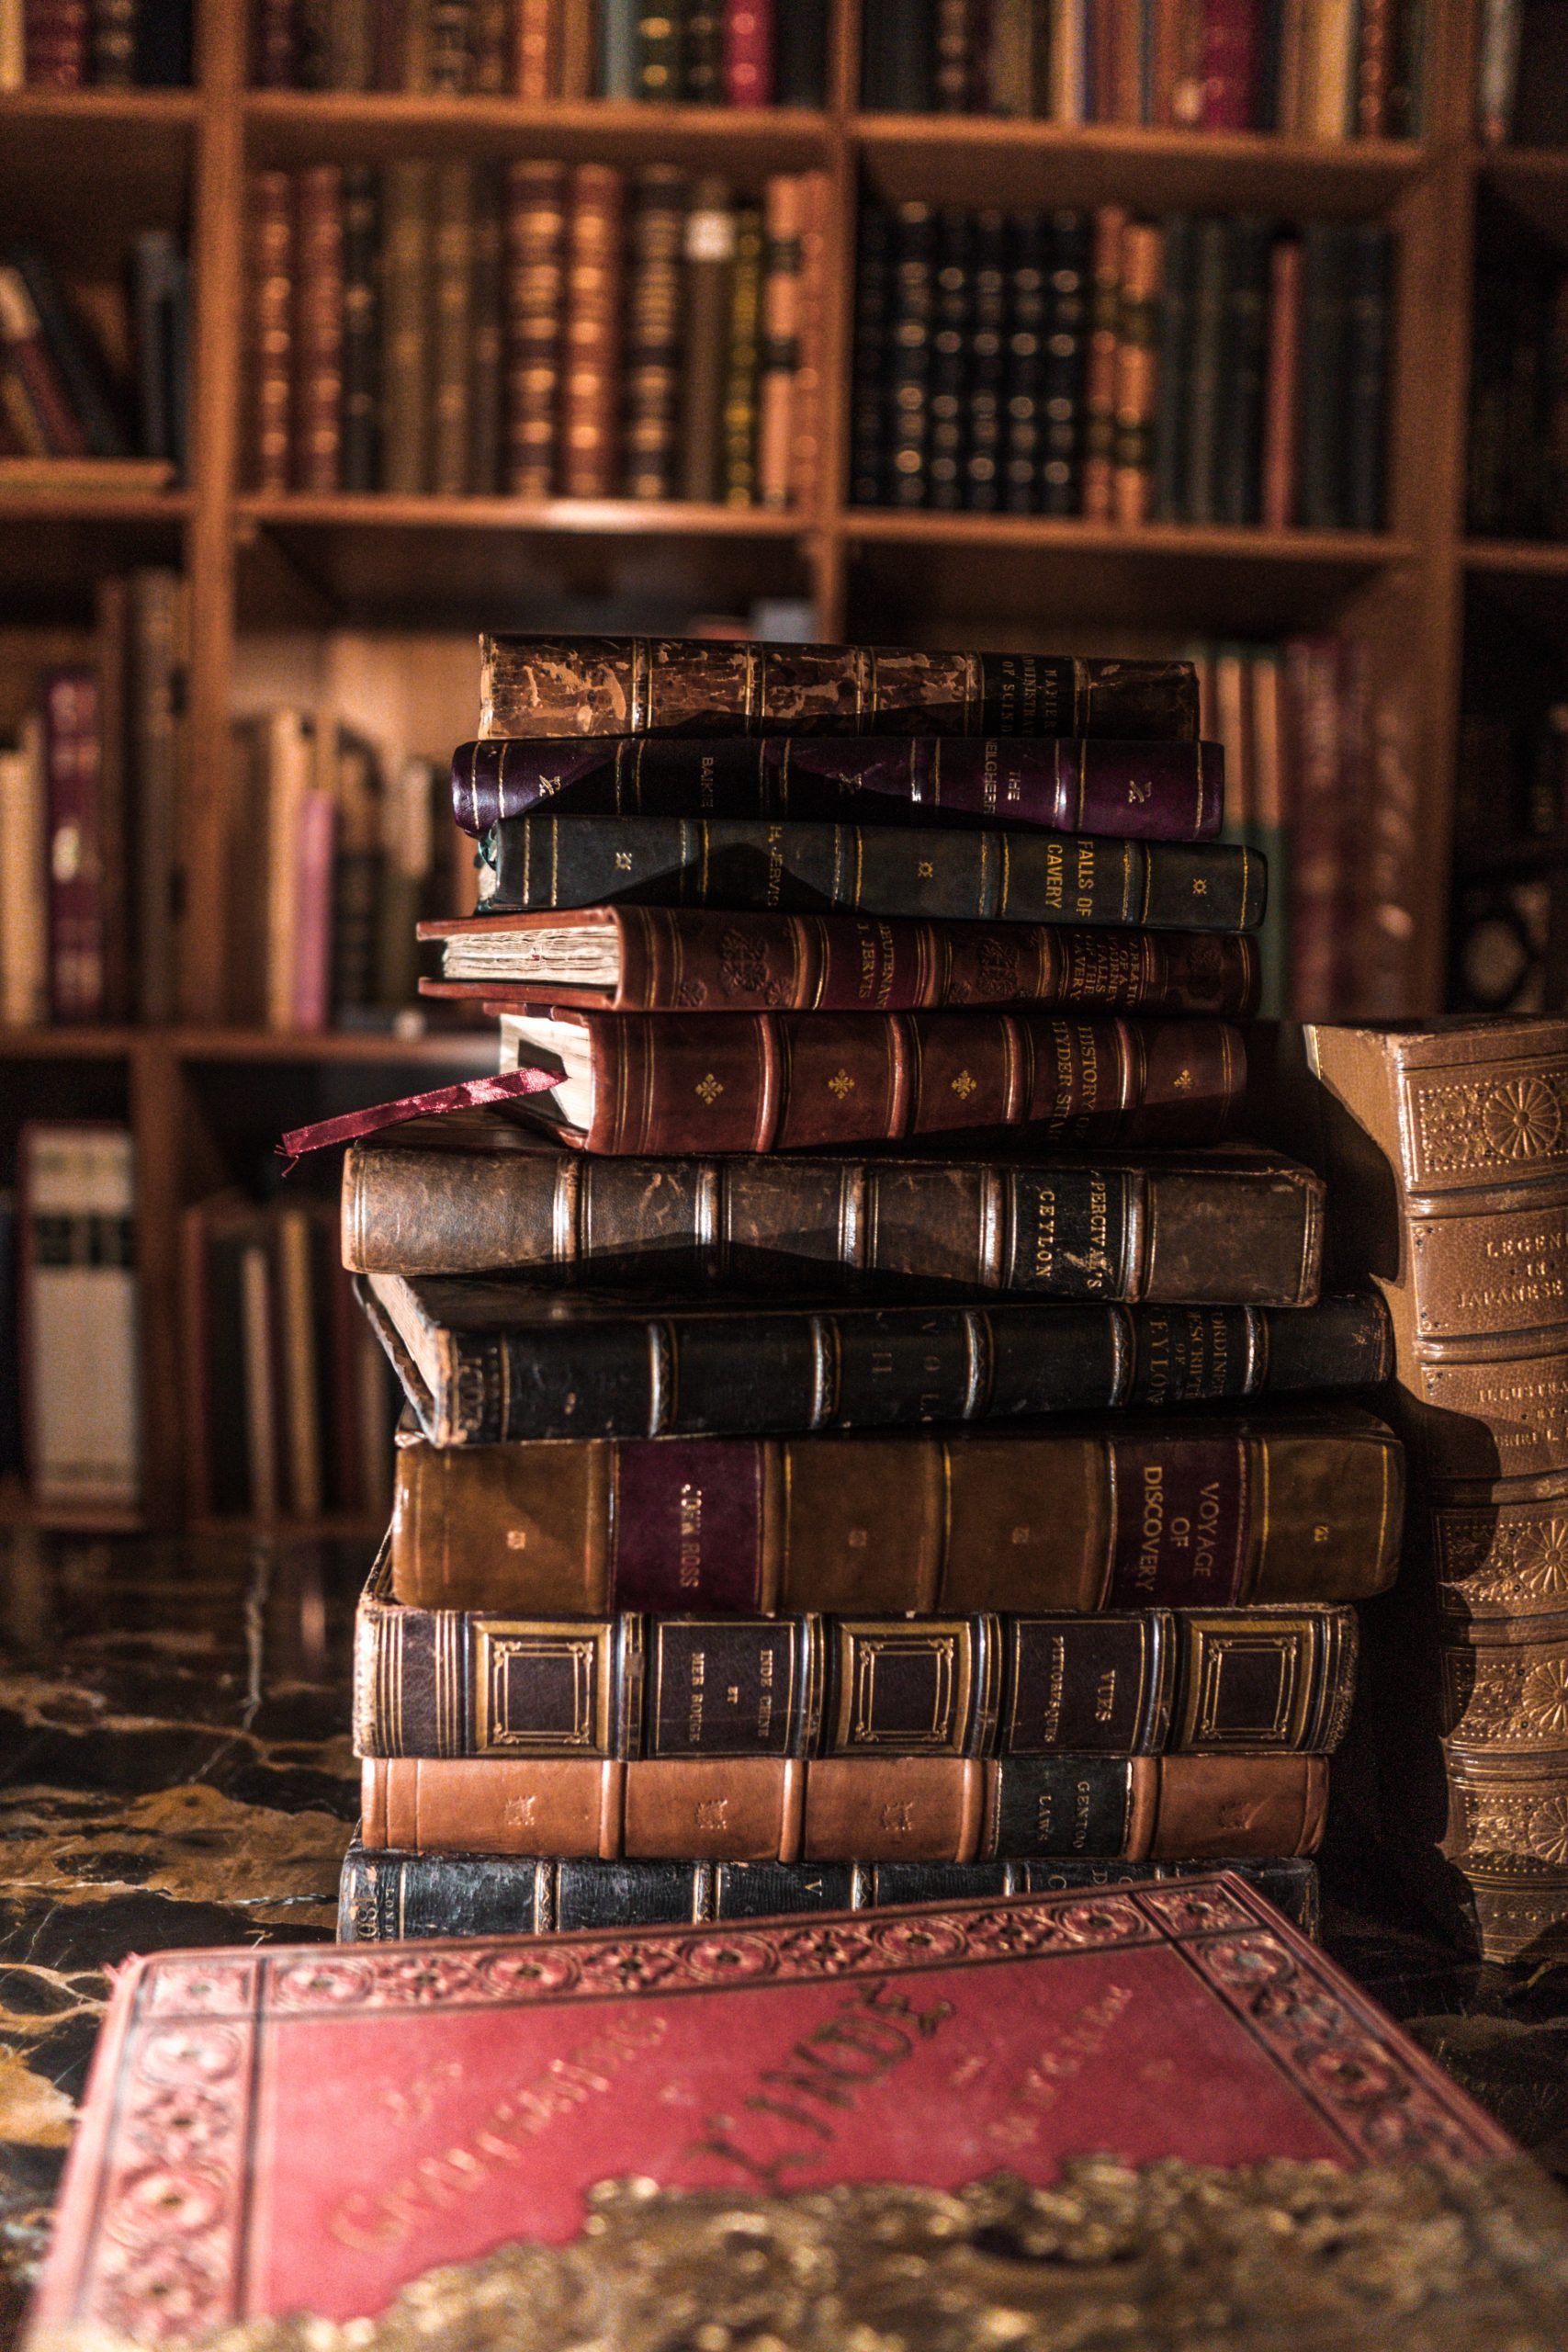 A stack of old books in a library - Bookshelf, books, dark academia, library